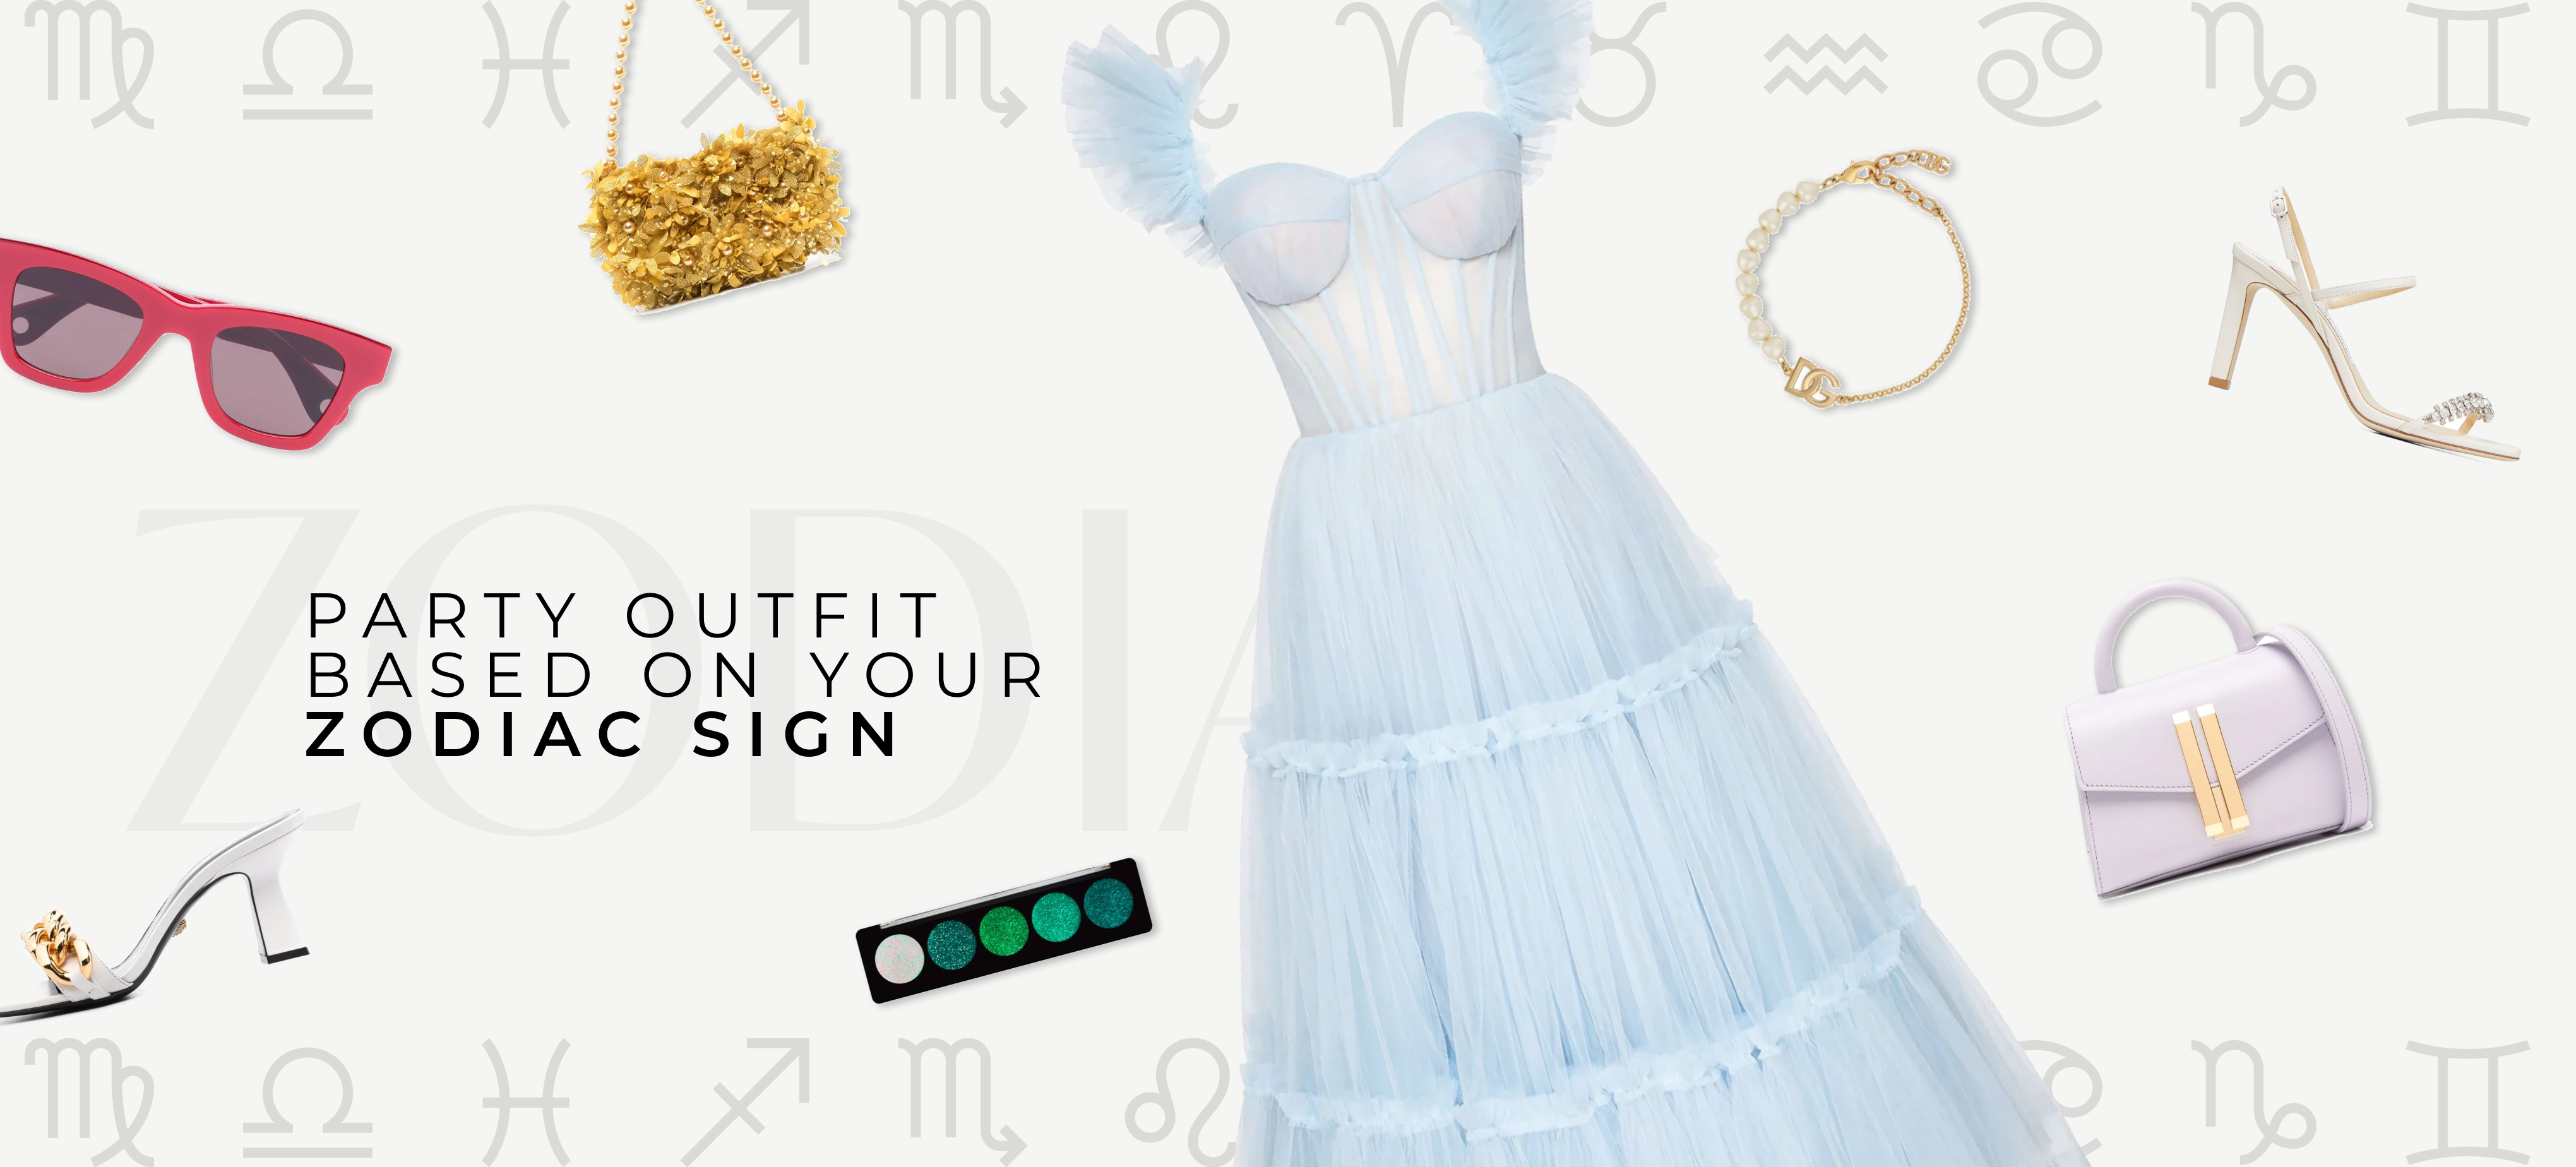 Party outfit based on your zodiac sign